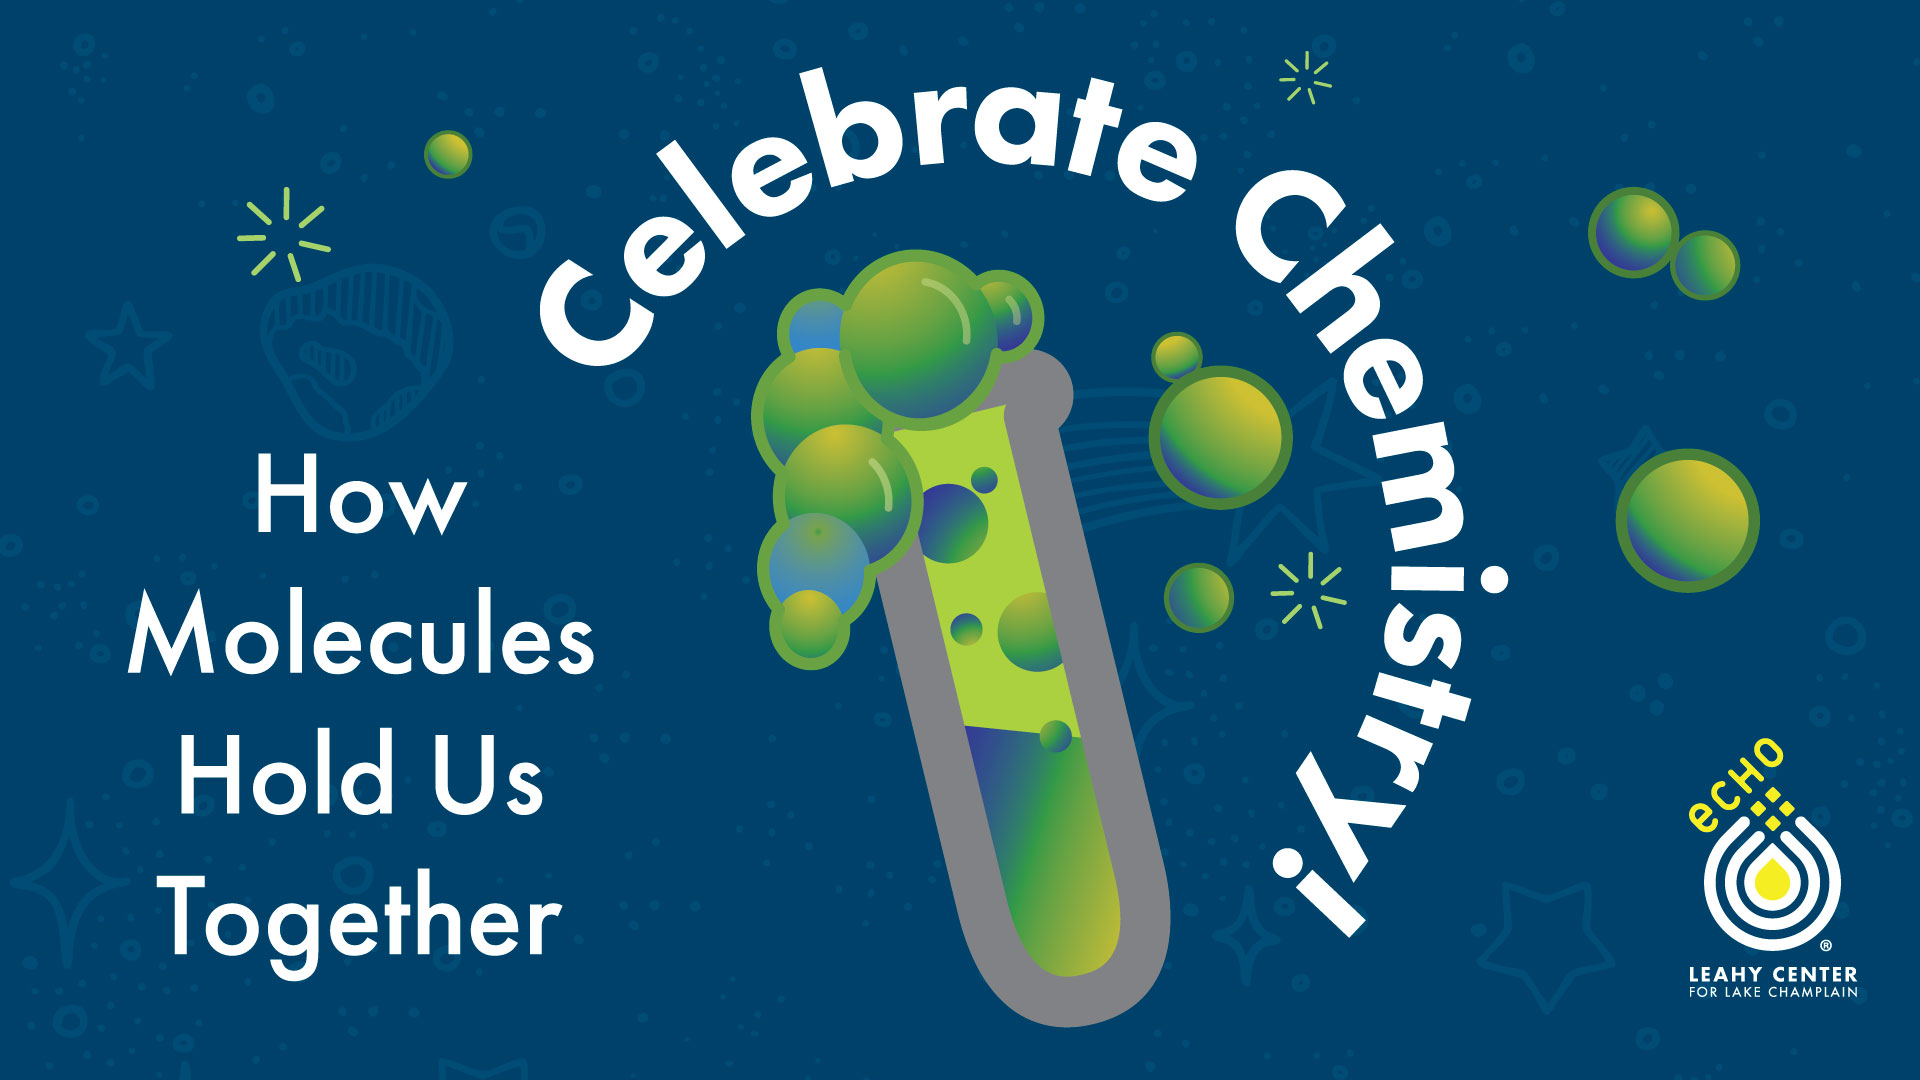 Celebrate Chemistry! How Molecules Hold Us Together, on a graphic with a bubbling green liquid in a test tube with bubbles coming out.